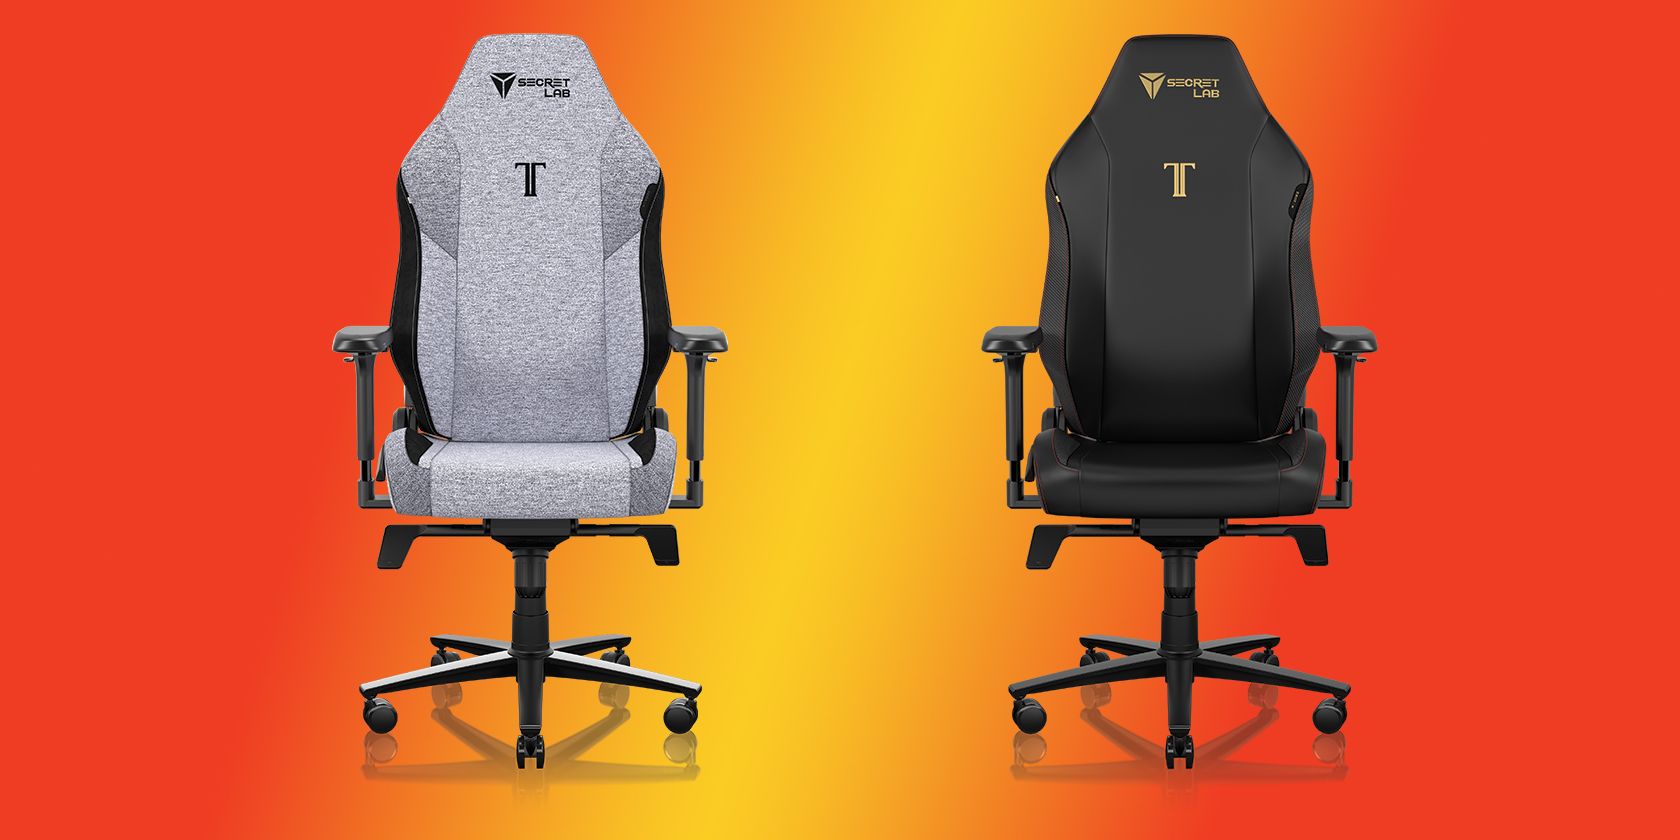 Secretlab Announces Its All-New 2022 Series Gaming Chairs